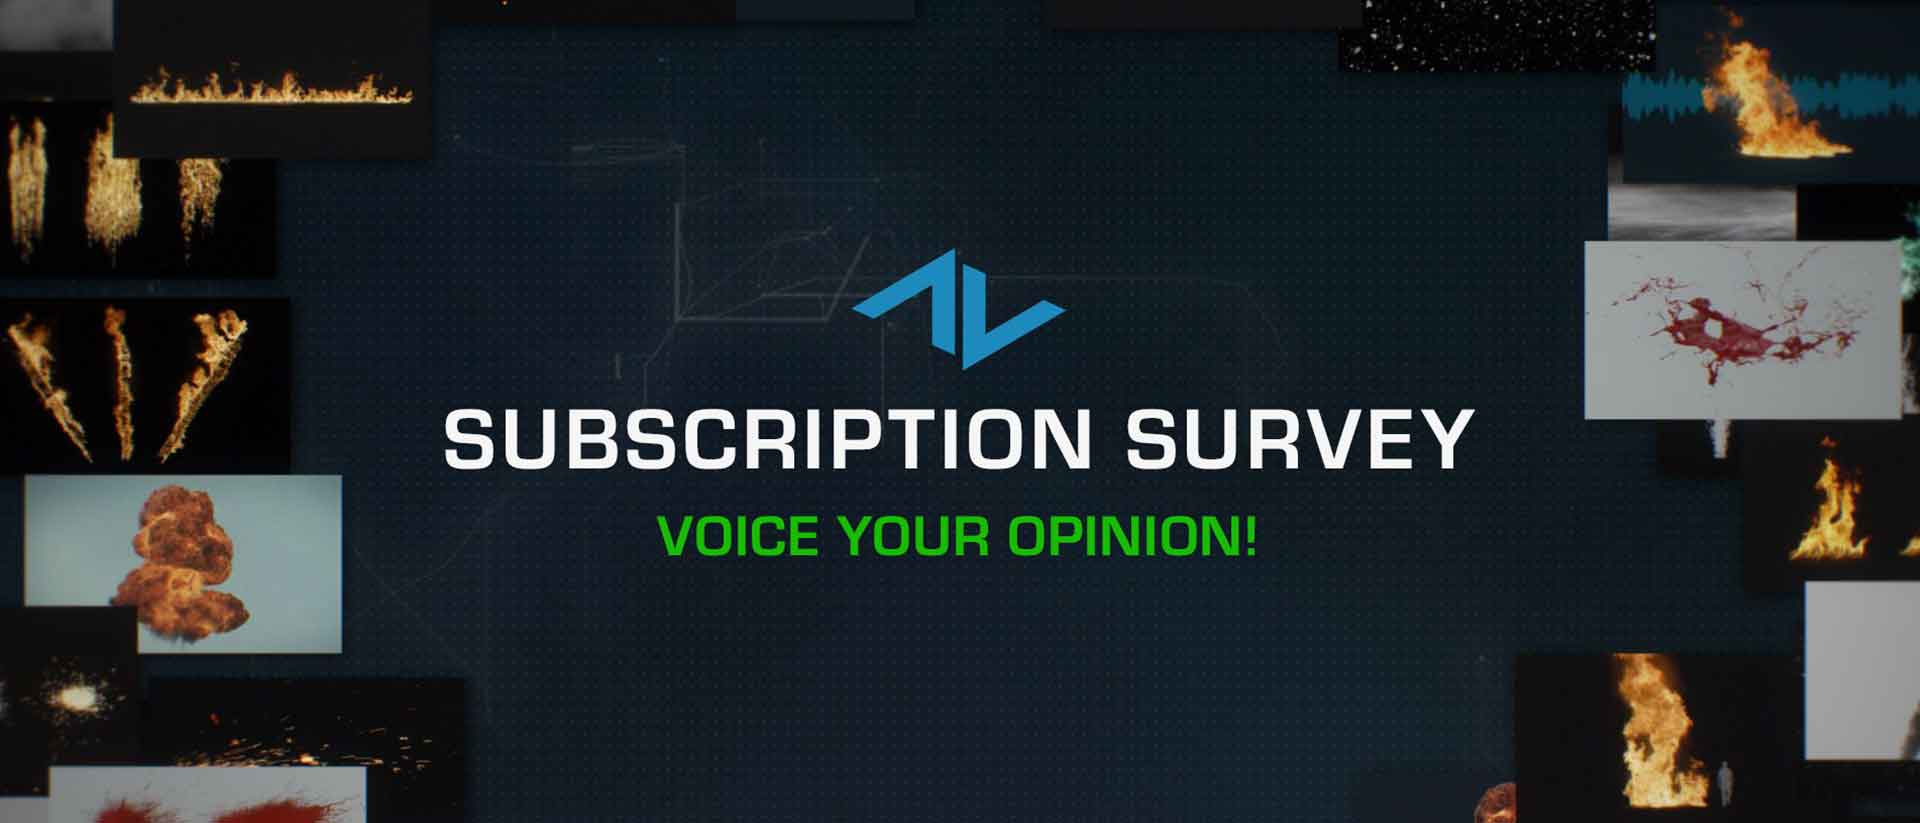 Give Us Your Feedback & Help Create A Subscription You'll Love!